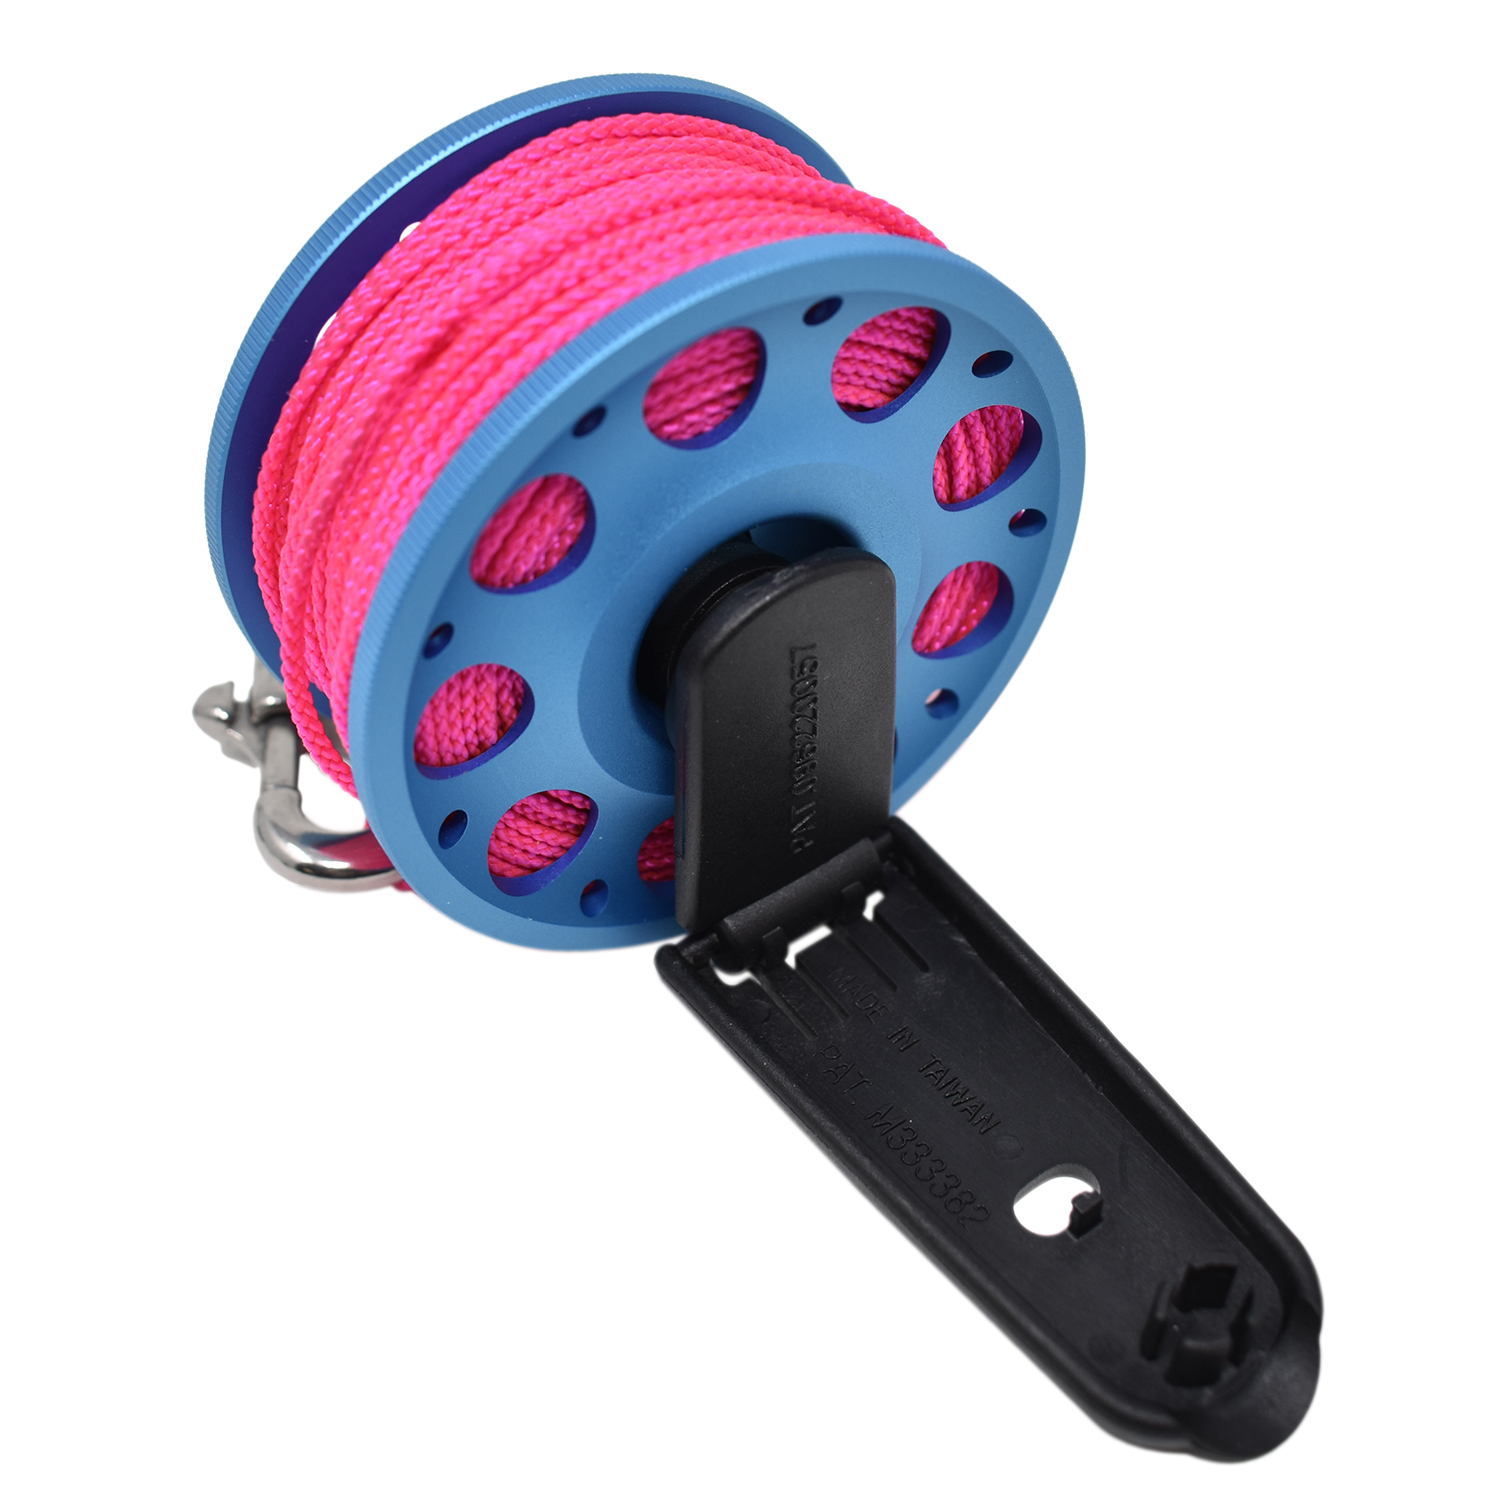 Aluminum Finger Spool 100ft Dive Reel w/ Retractable Holder, Baby Blue/Pink - image 1 of 4